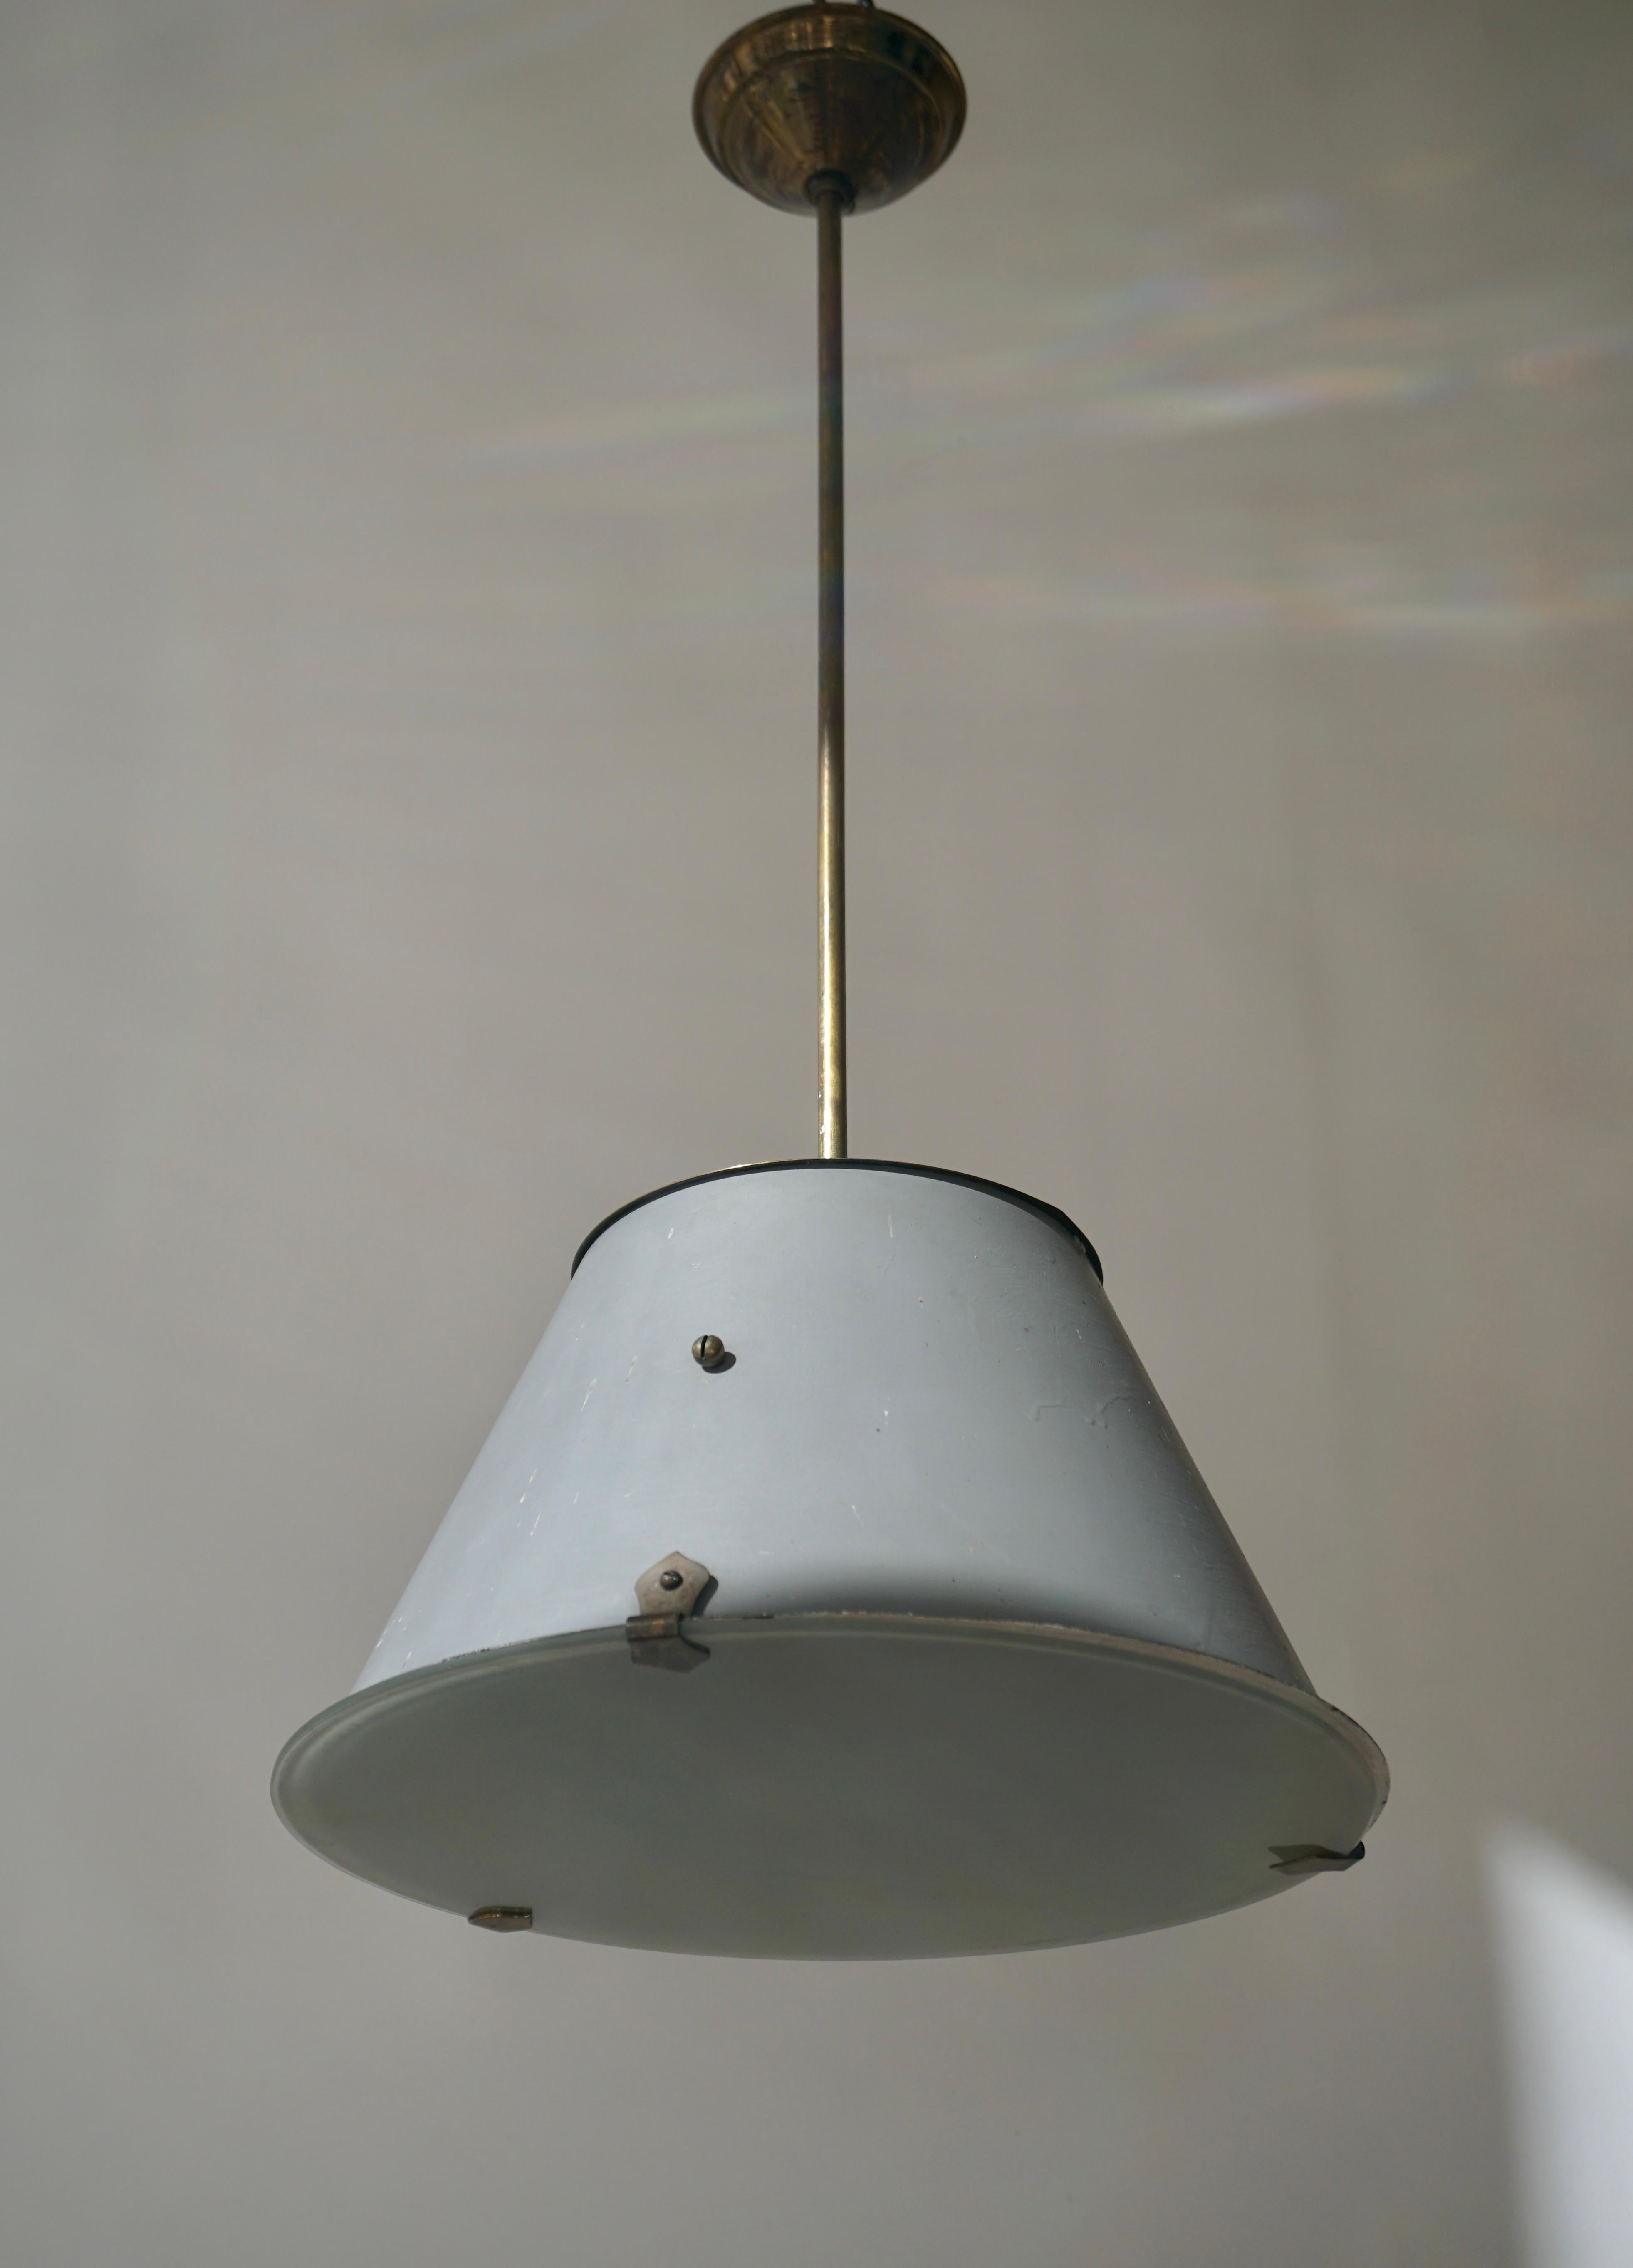 Three Industrial Art Deco Pendant Lights in Brass and Glass For Sale 4